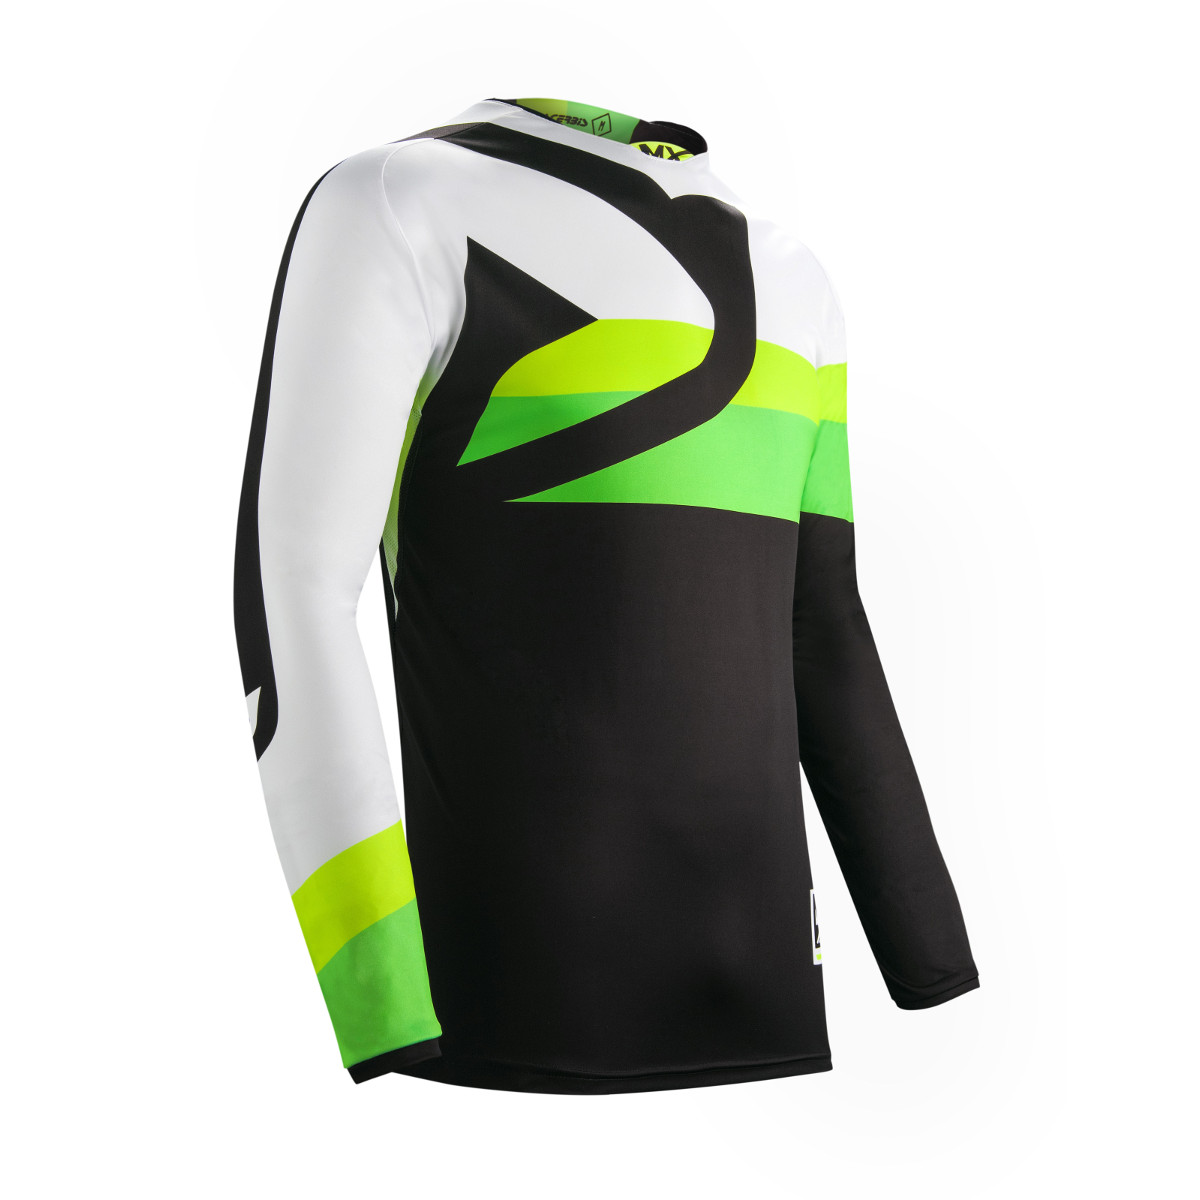 Acerbis Jersey Limited Edition Spacelord - Black/Green